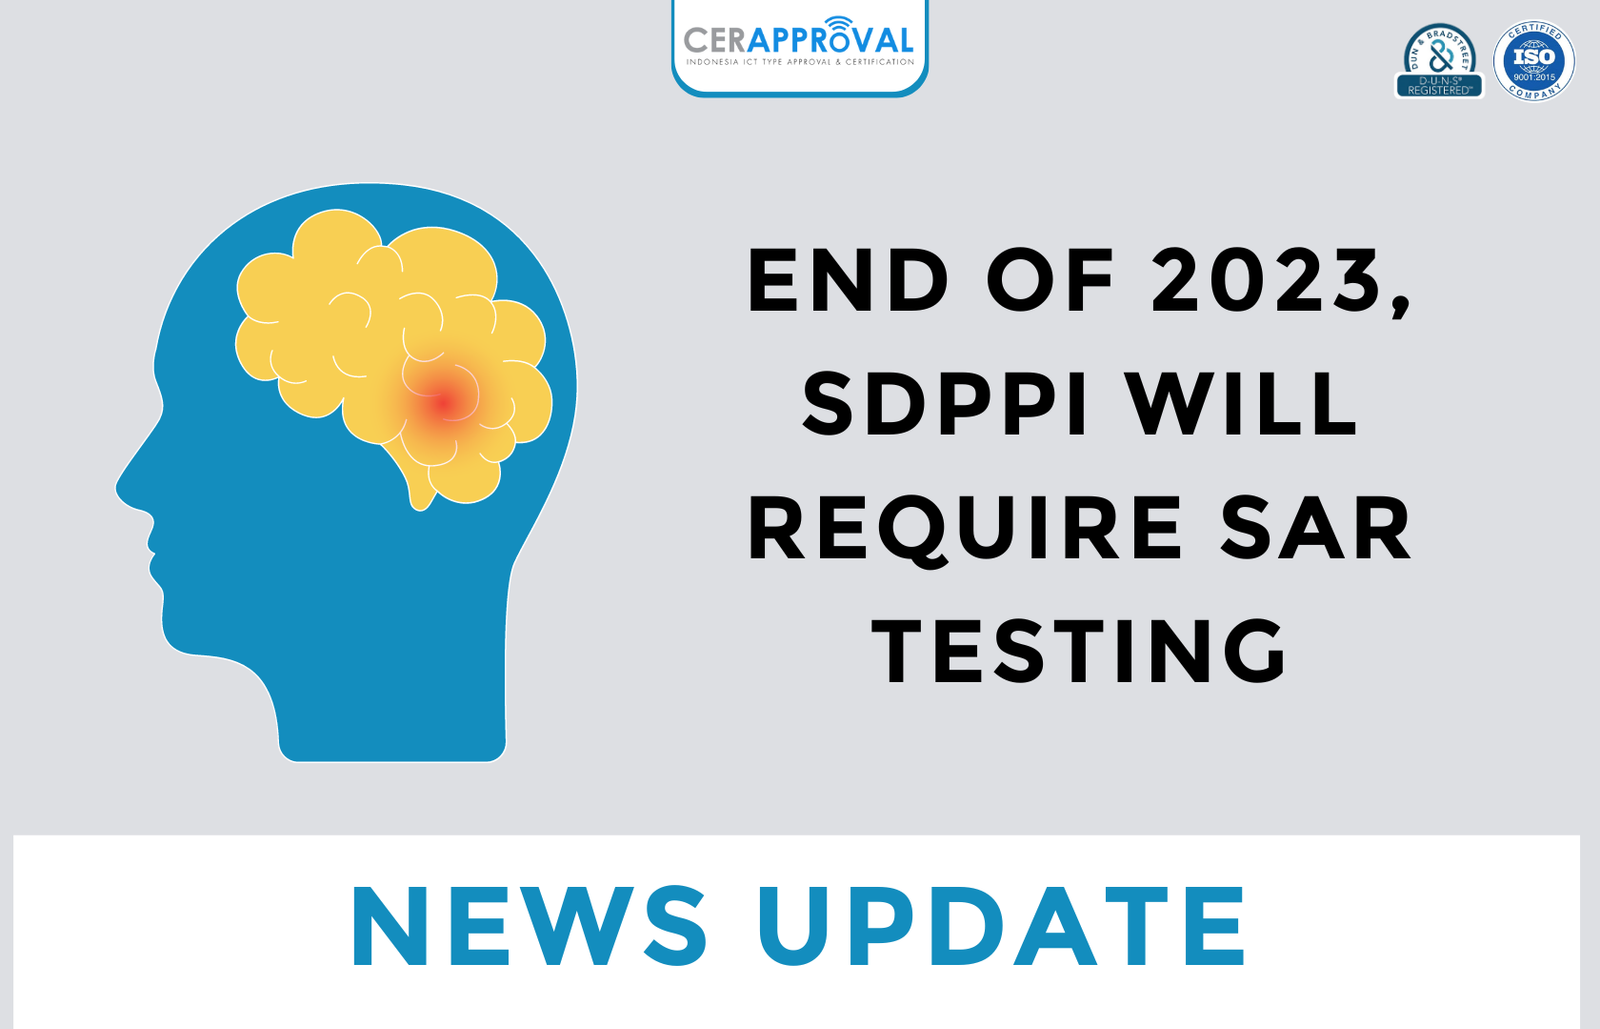 END OF 2023, SDPPI WILL REQUIRE SAR TESTING